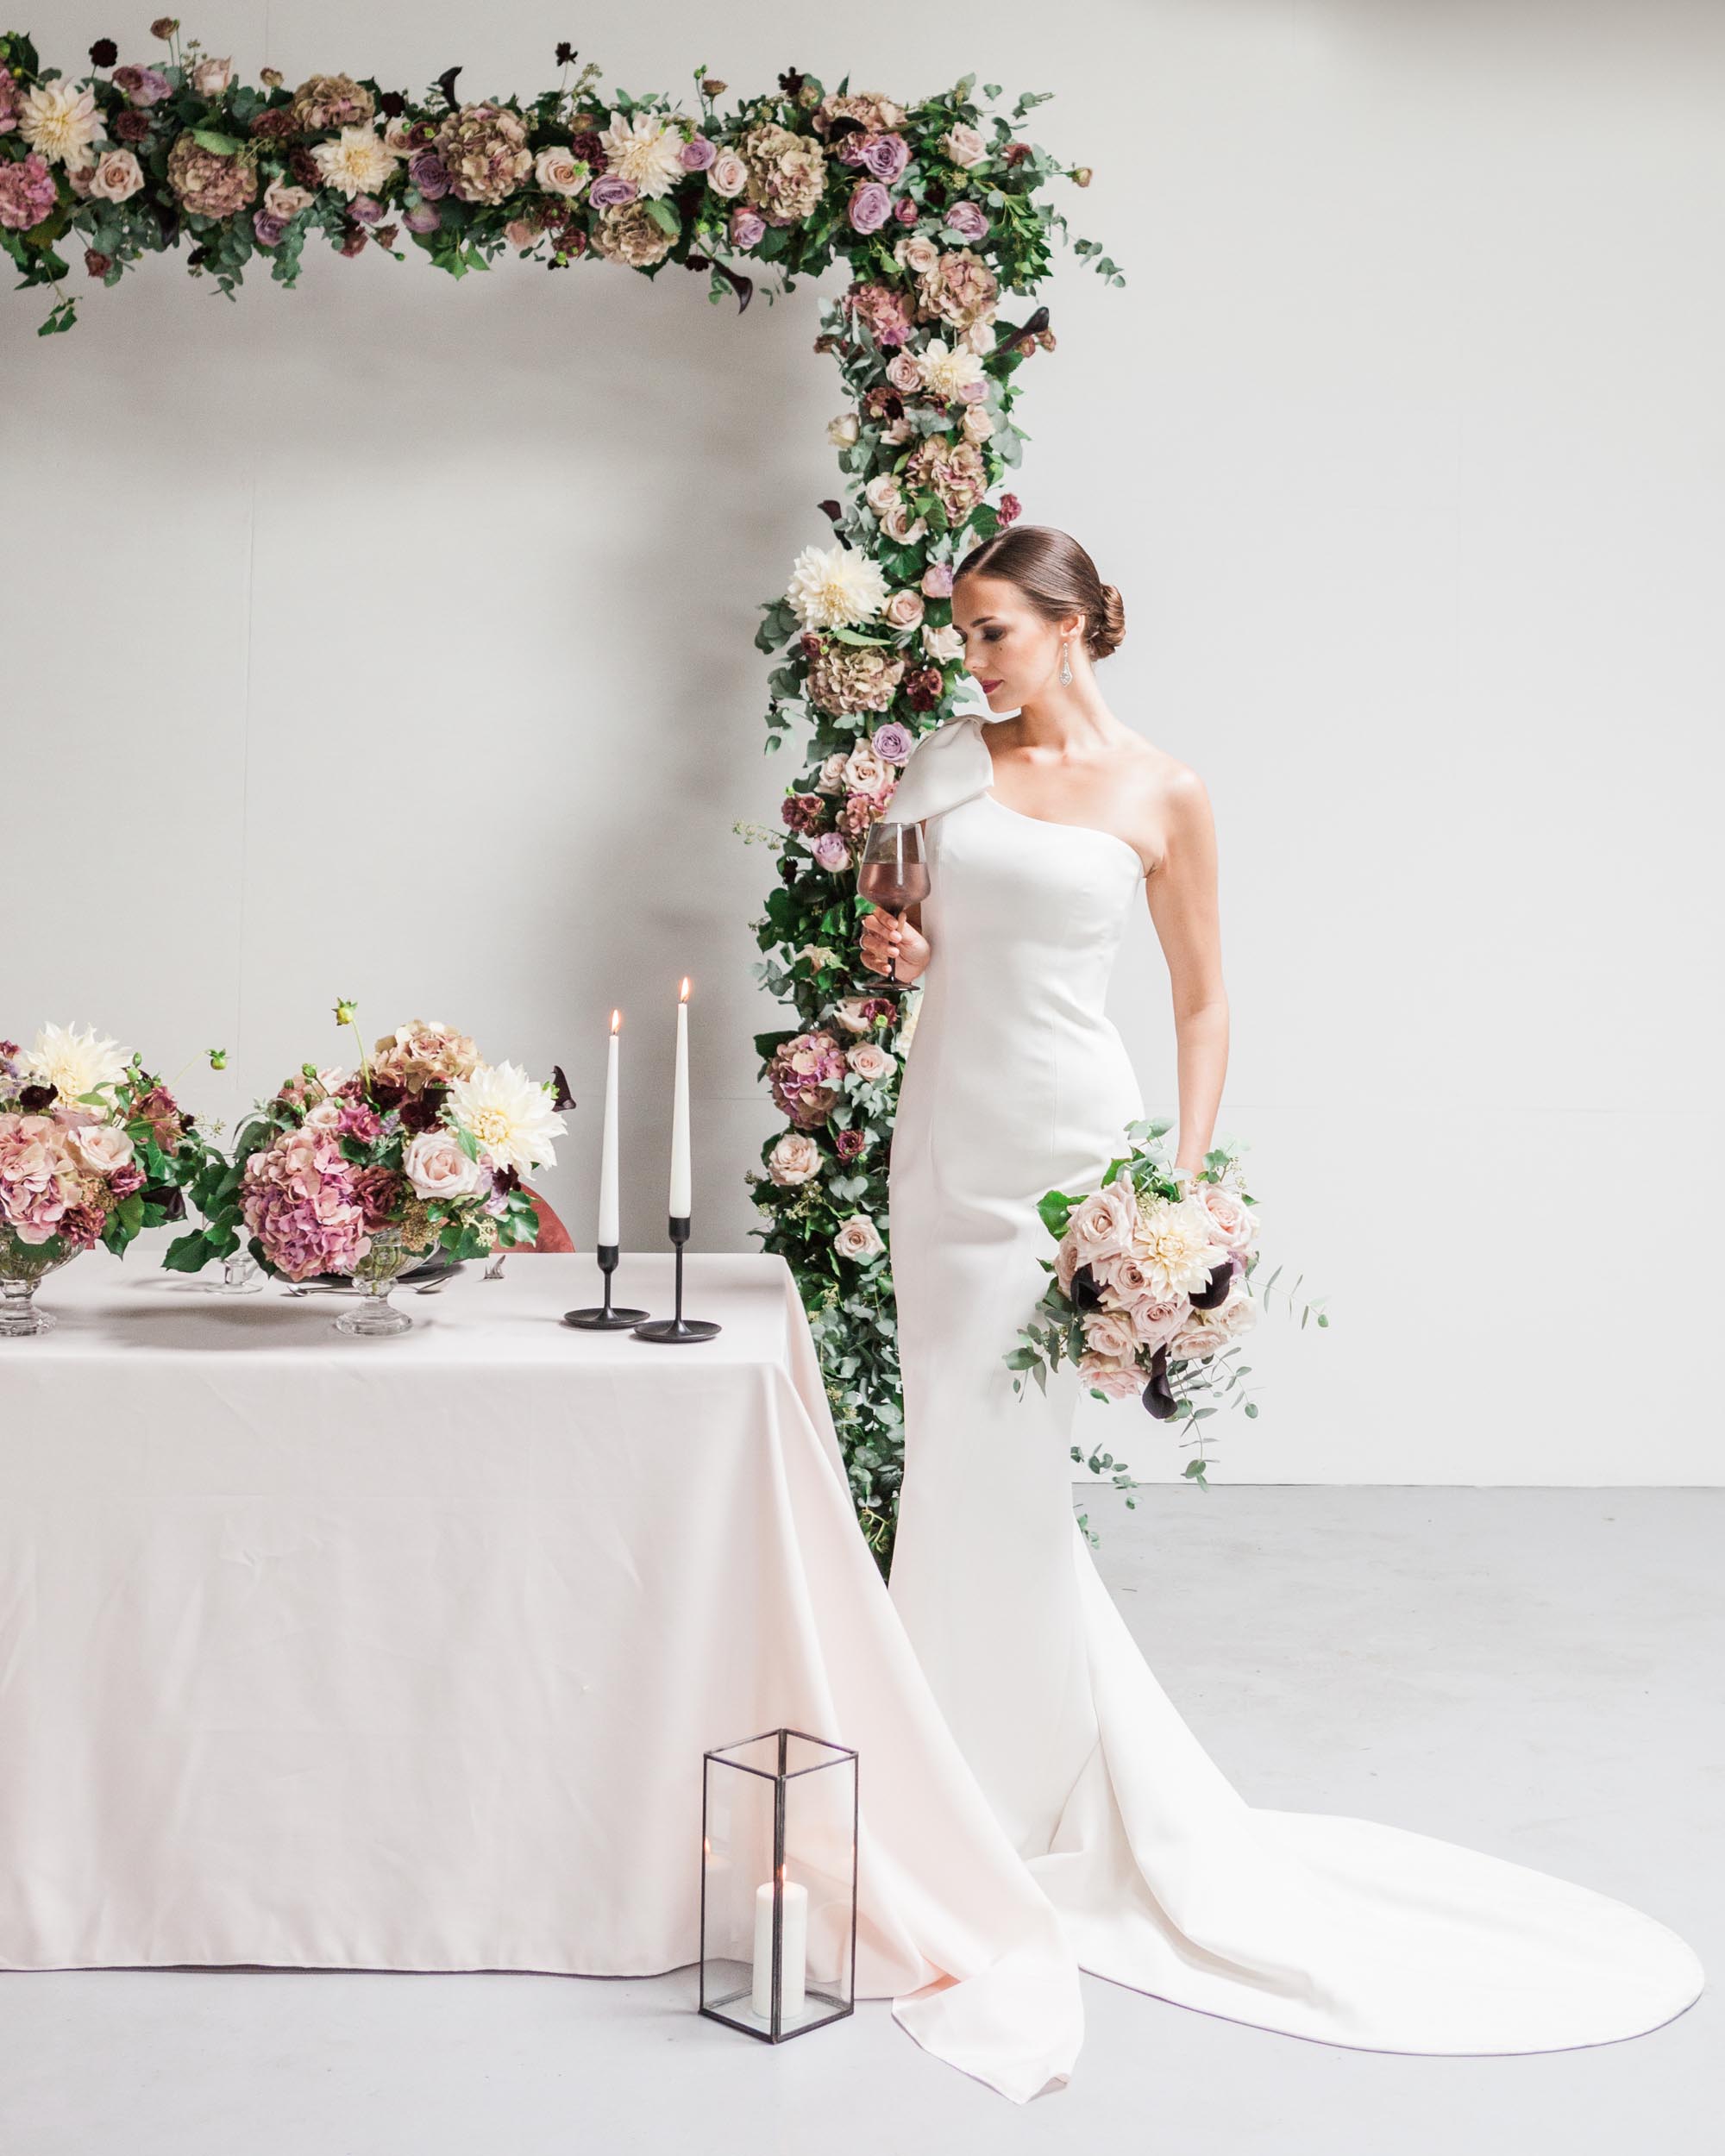 Delicate blush florals and striking monochrome stationery with a sleek designer dress. Captured by Amanda Karen Photography